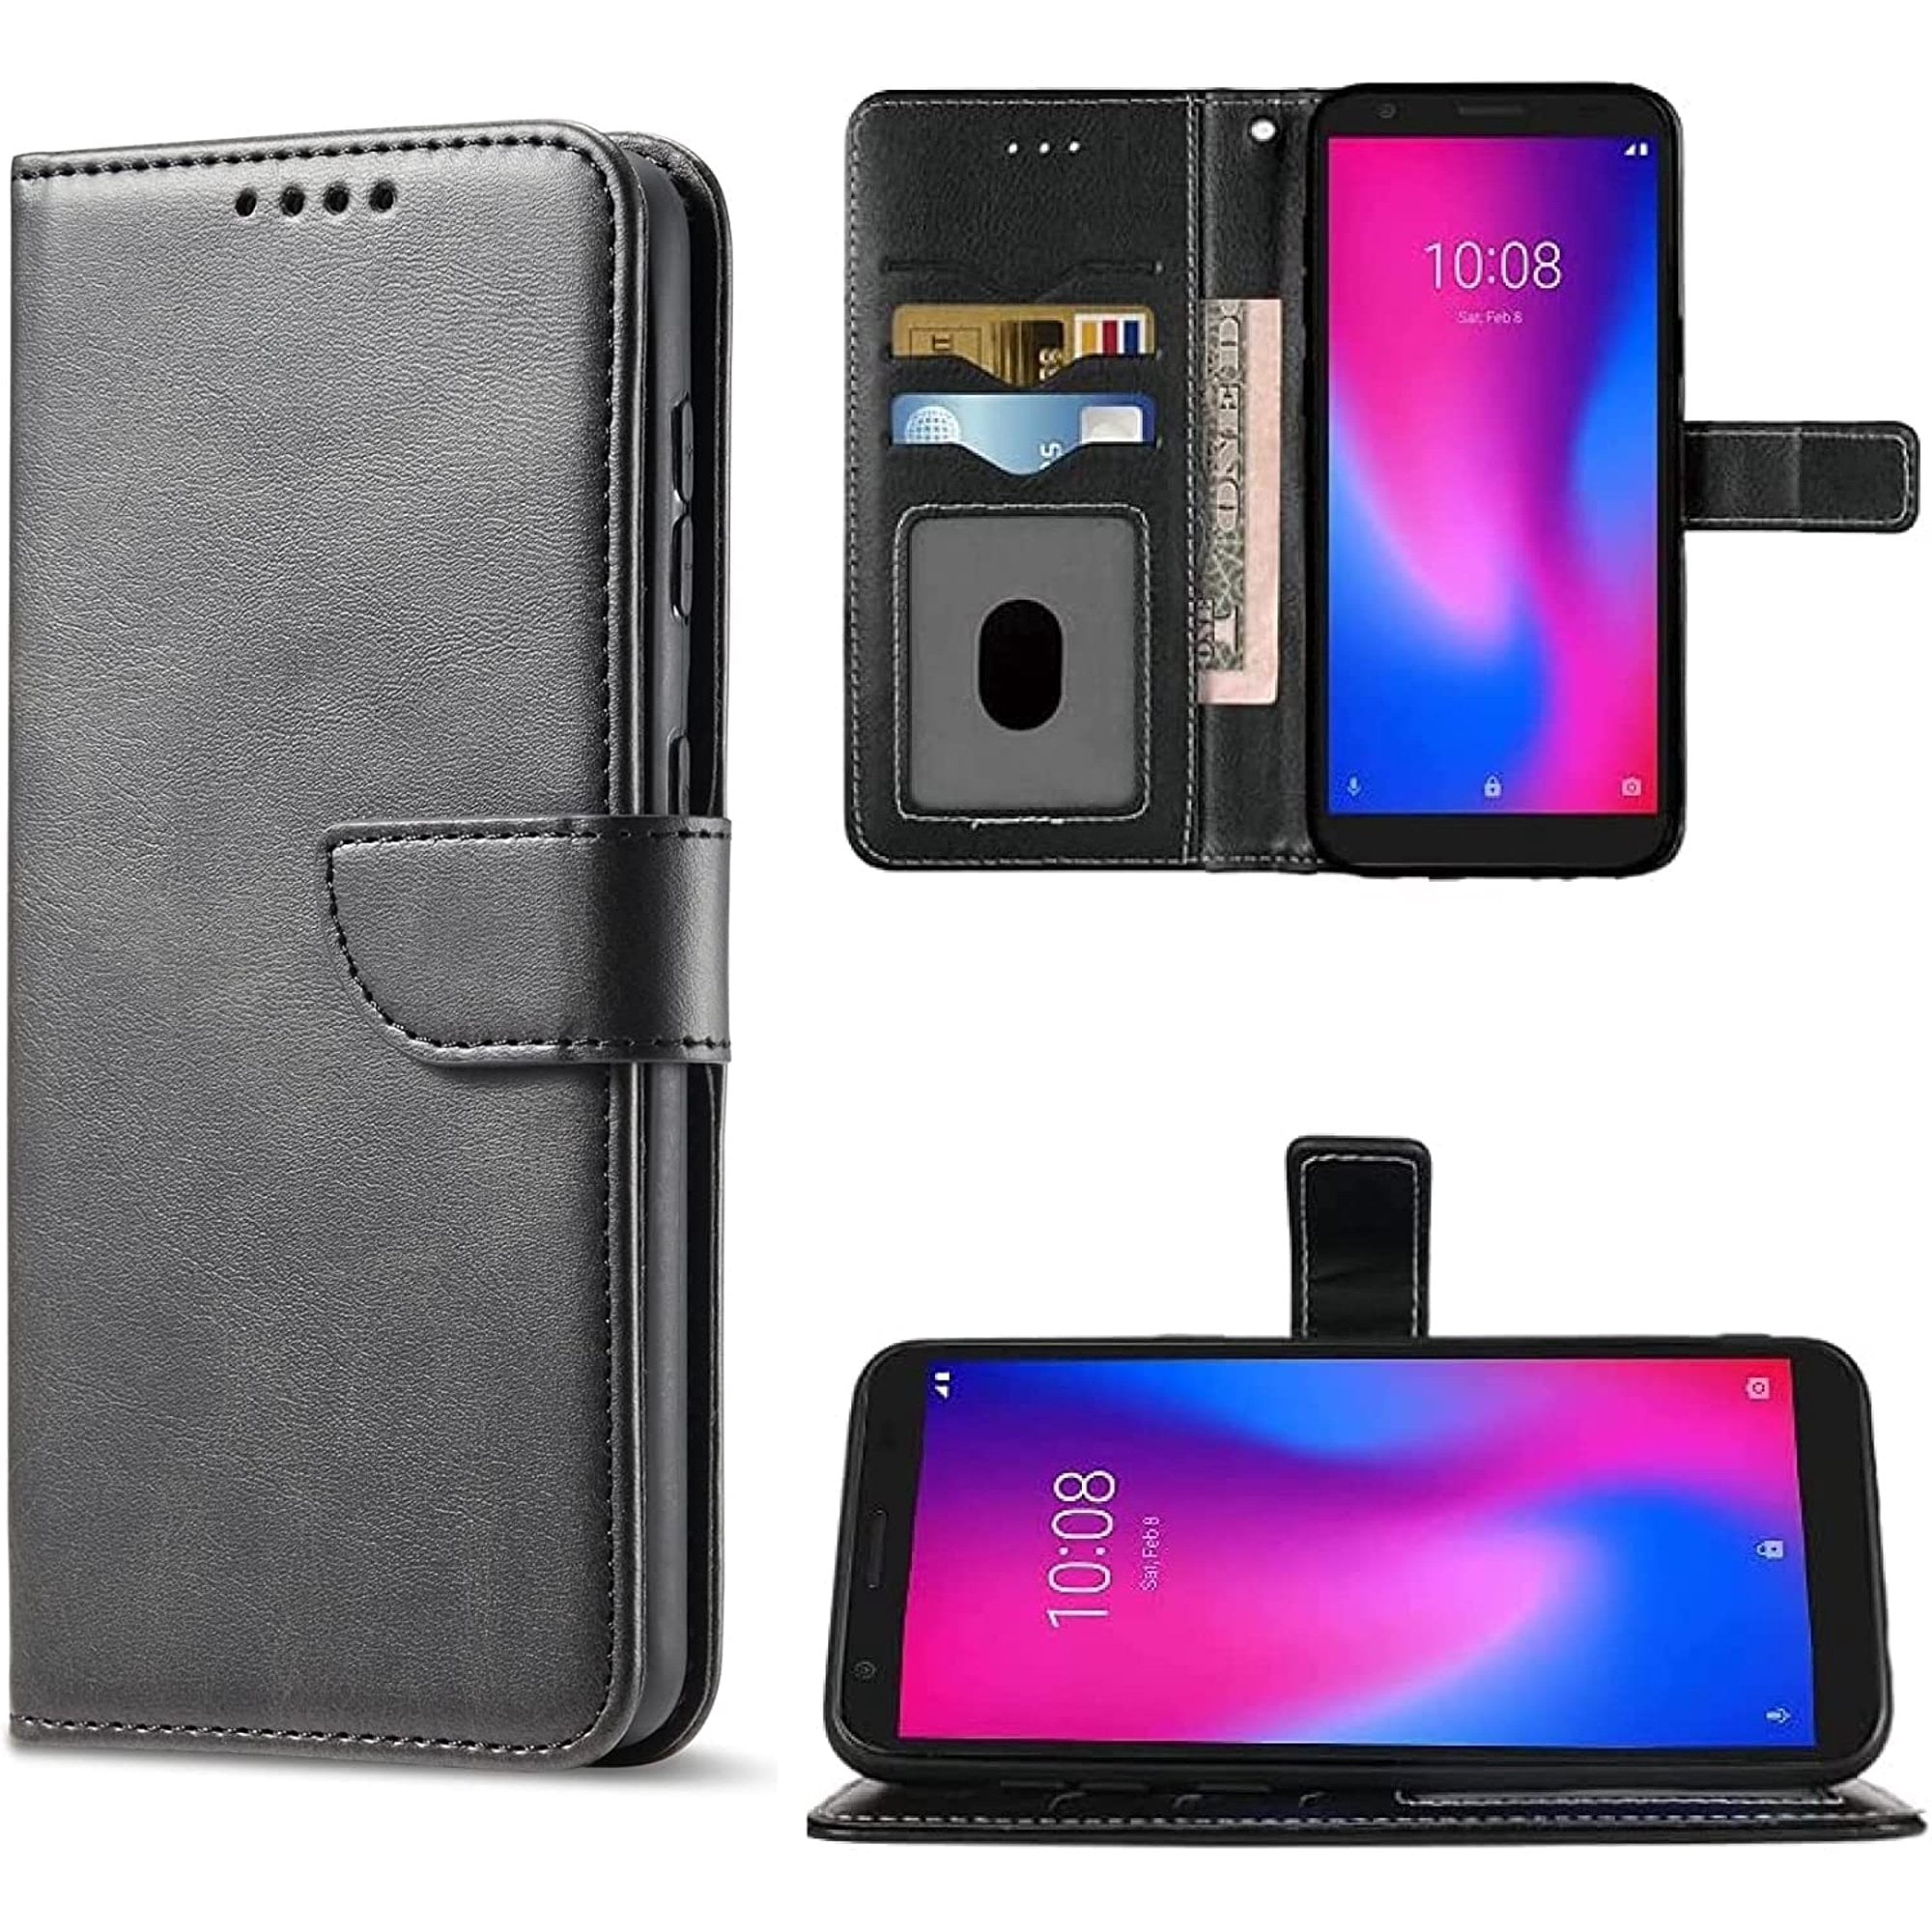 Source OEM Business Fashion Wallet Magnetic Flip PU Leather Case With Card  Holder For Cloud Mobile Stratus C7 M-215 on m.